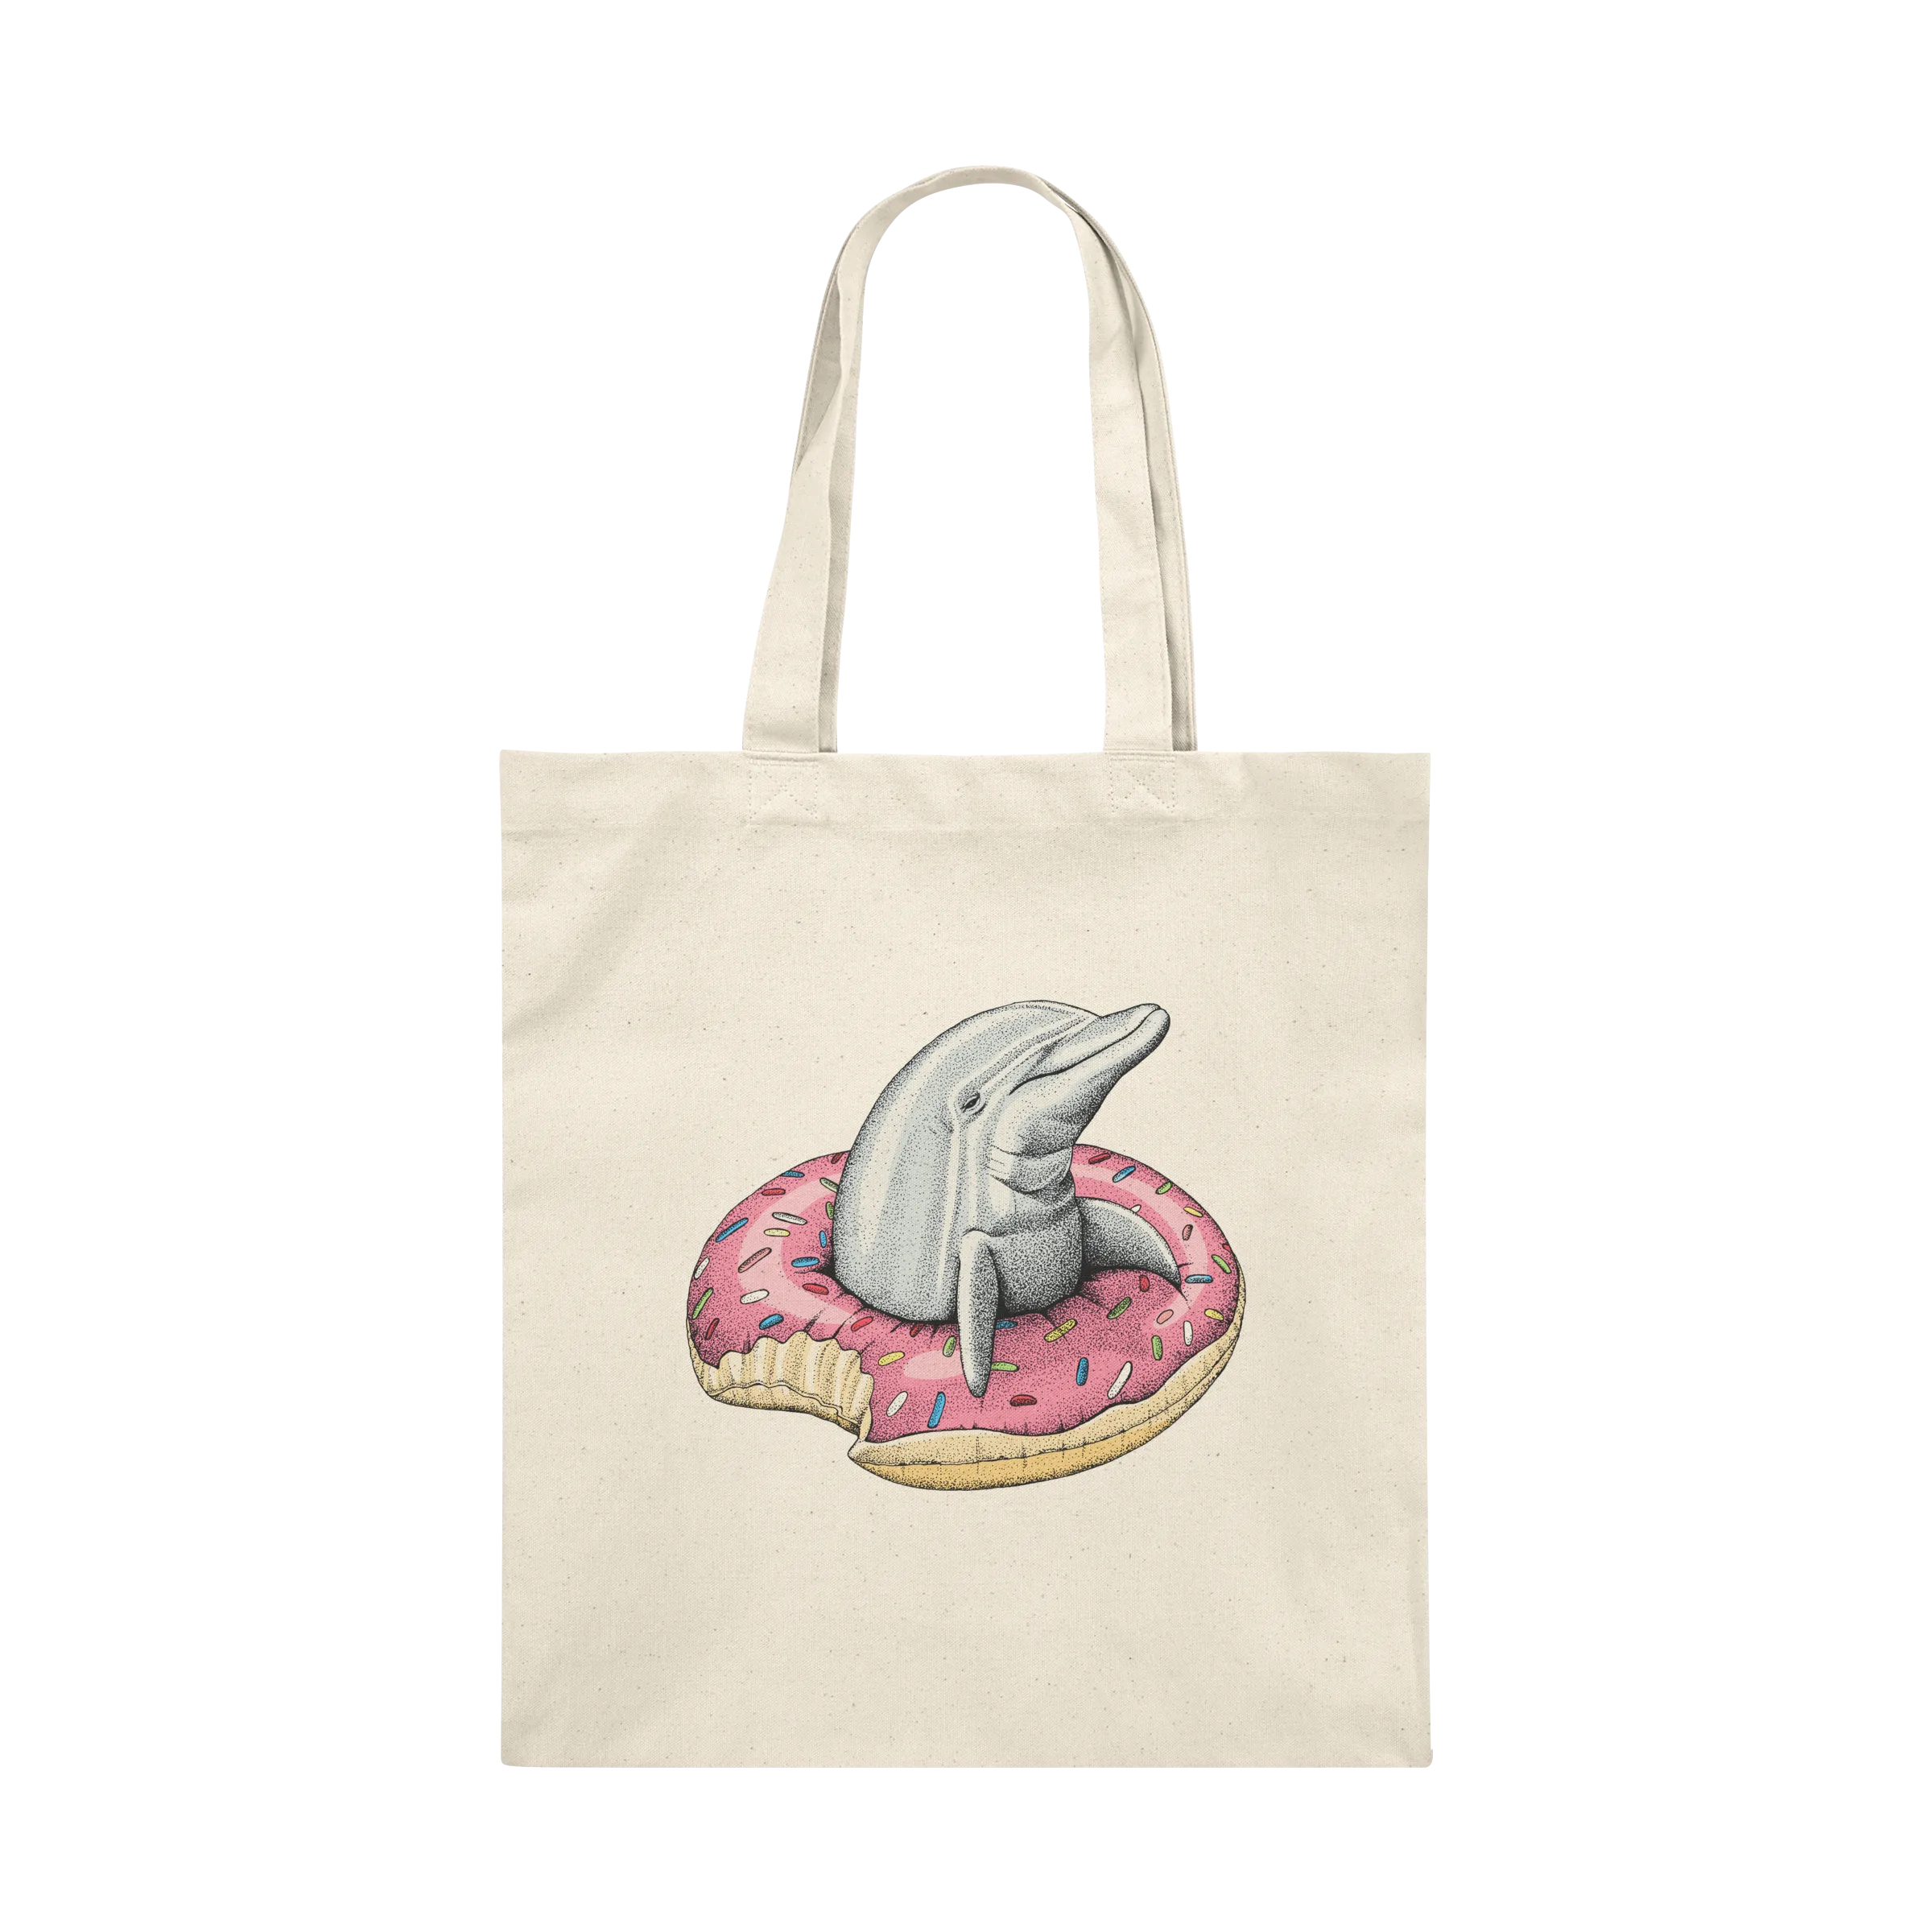 Lager Lure Bass Beer” graphic canvas tote by Habby Art.